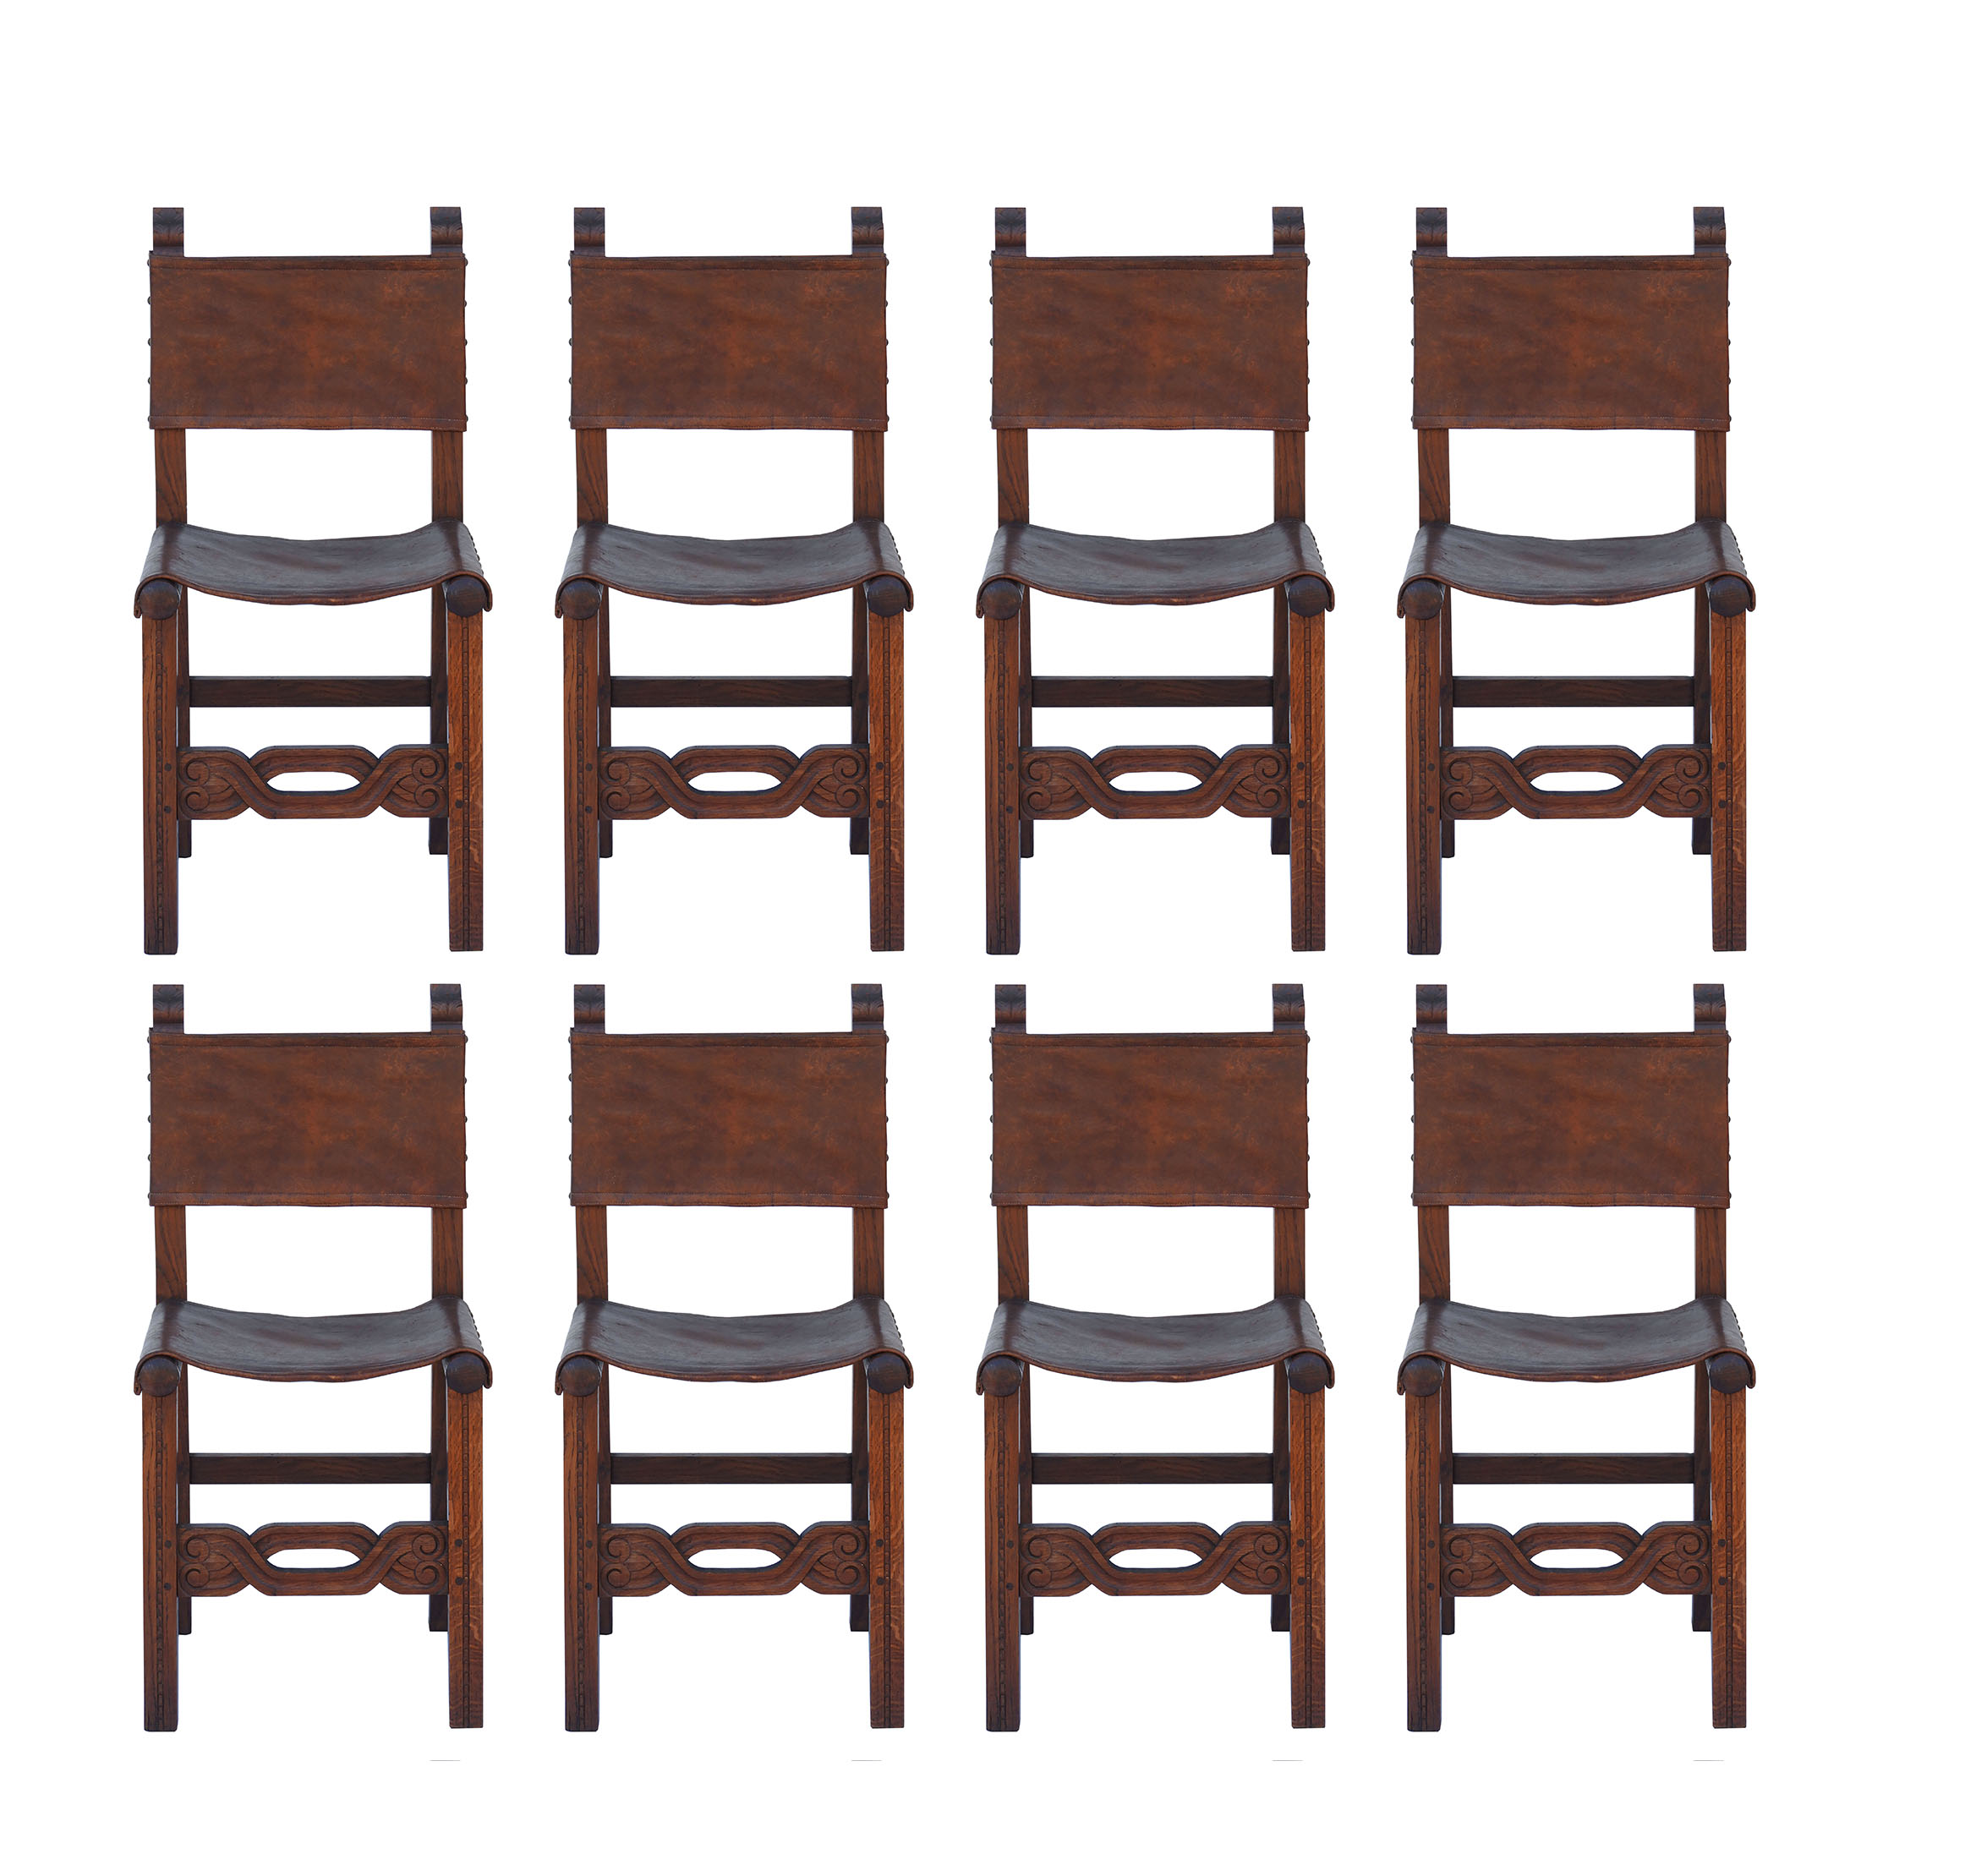 Eight Dining Chairs Early 20th Century Spanish Renaissance Revival